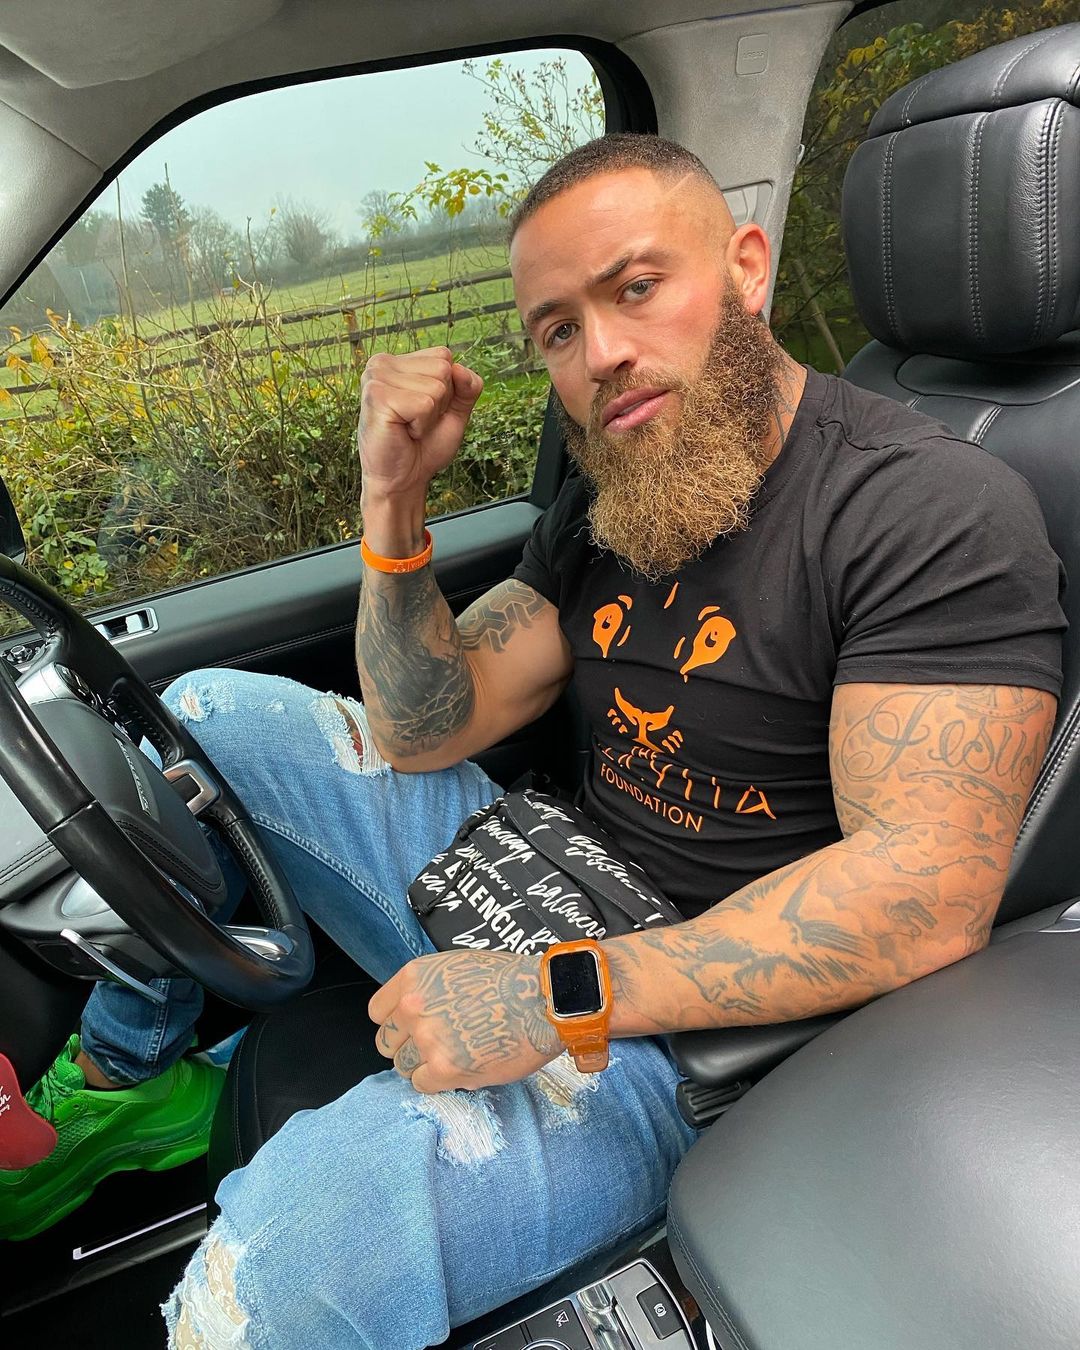 Ashley Cain in black t-shirt and blue jeans in a car